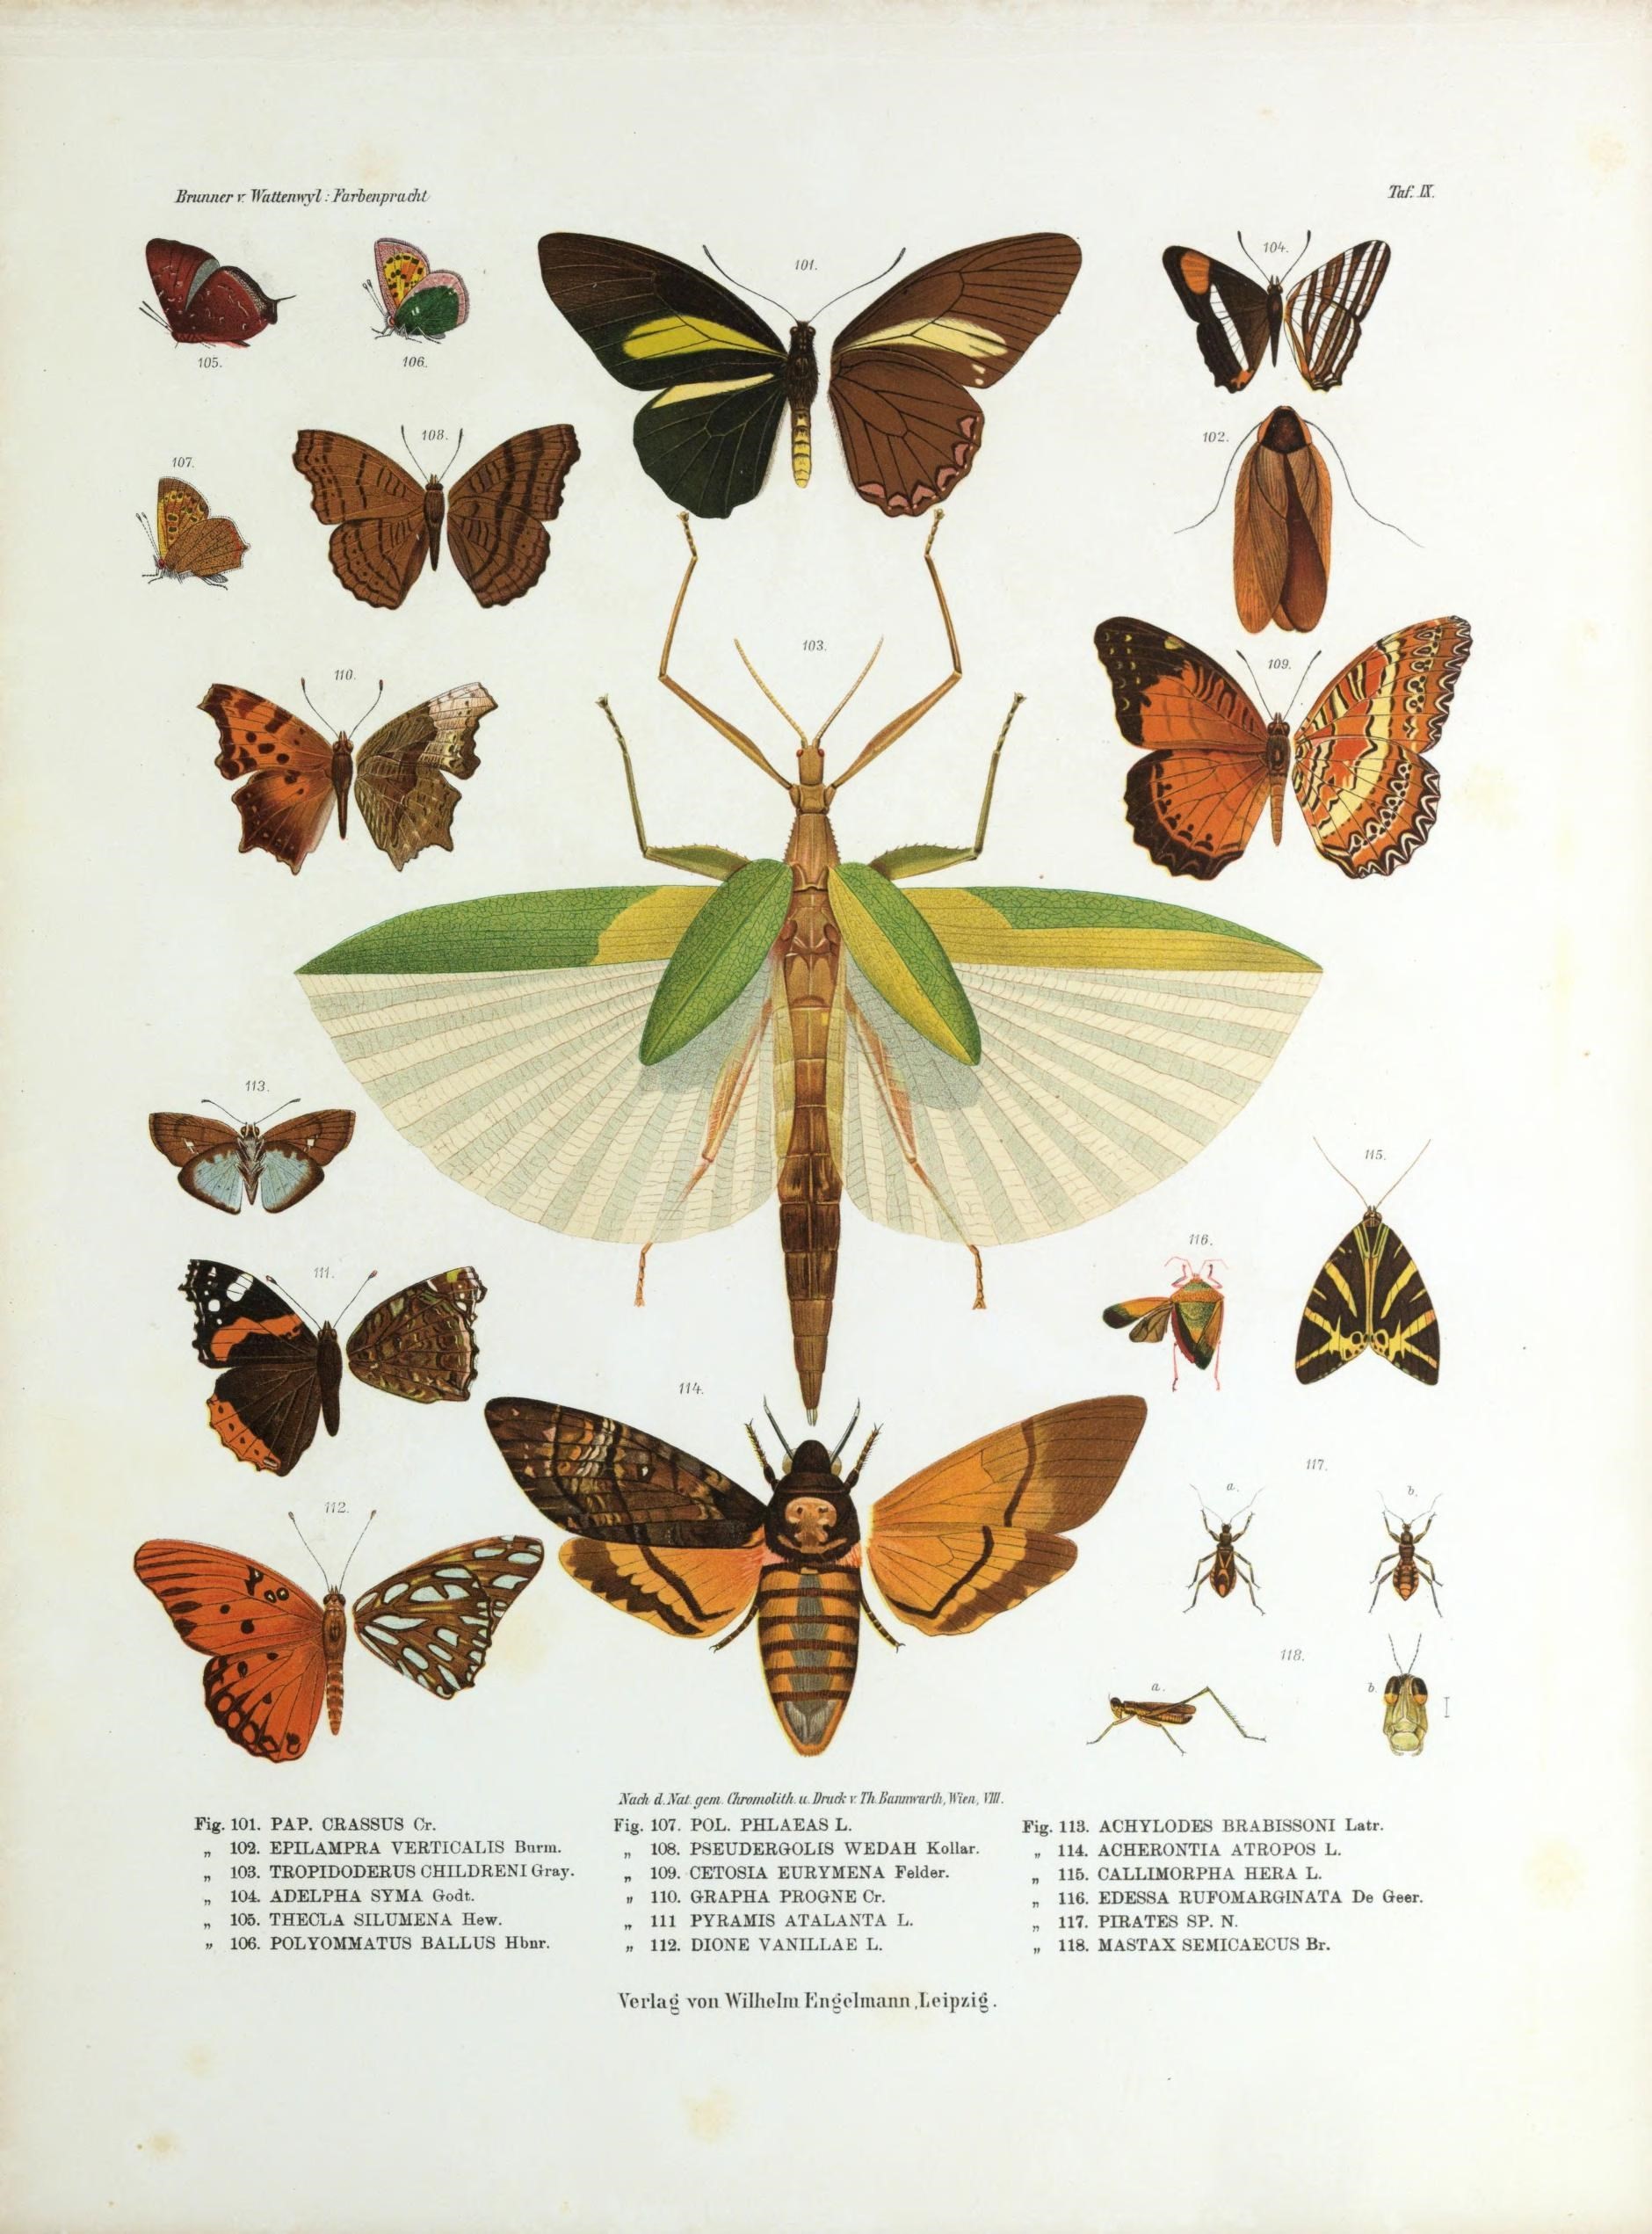 One page of illustrated insects of different sizes